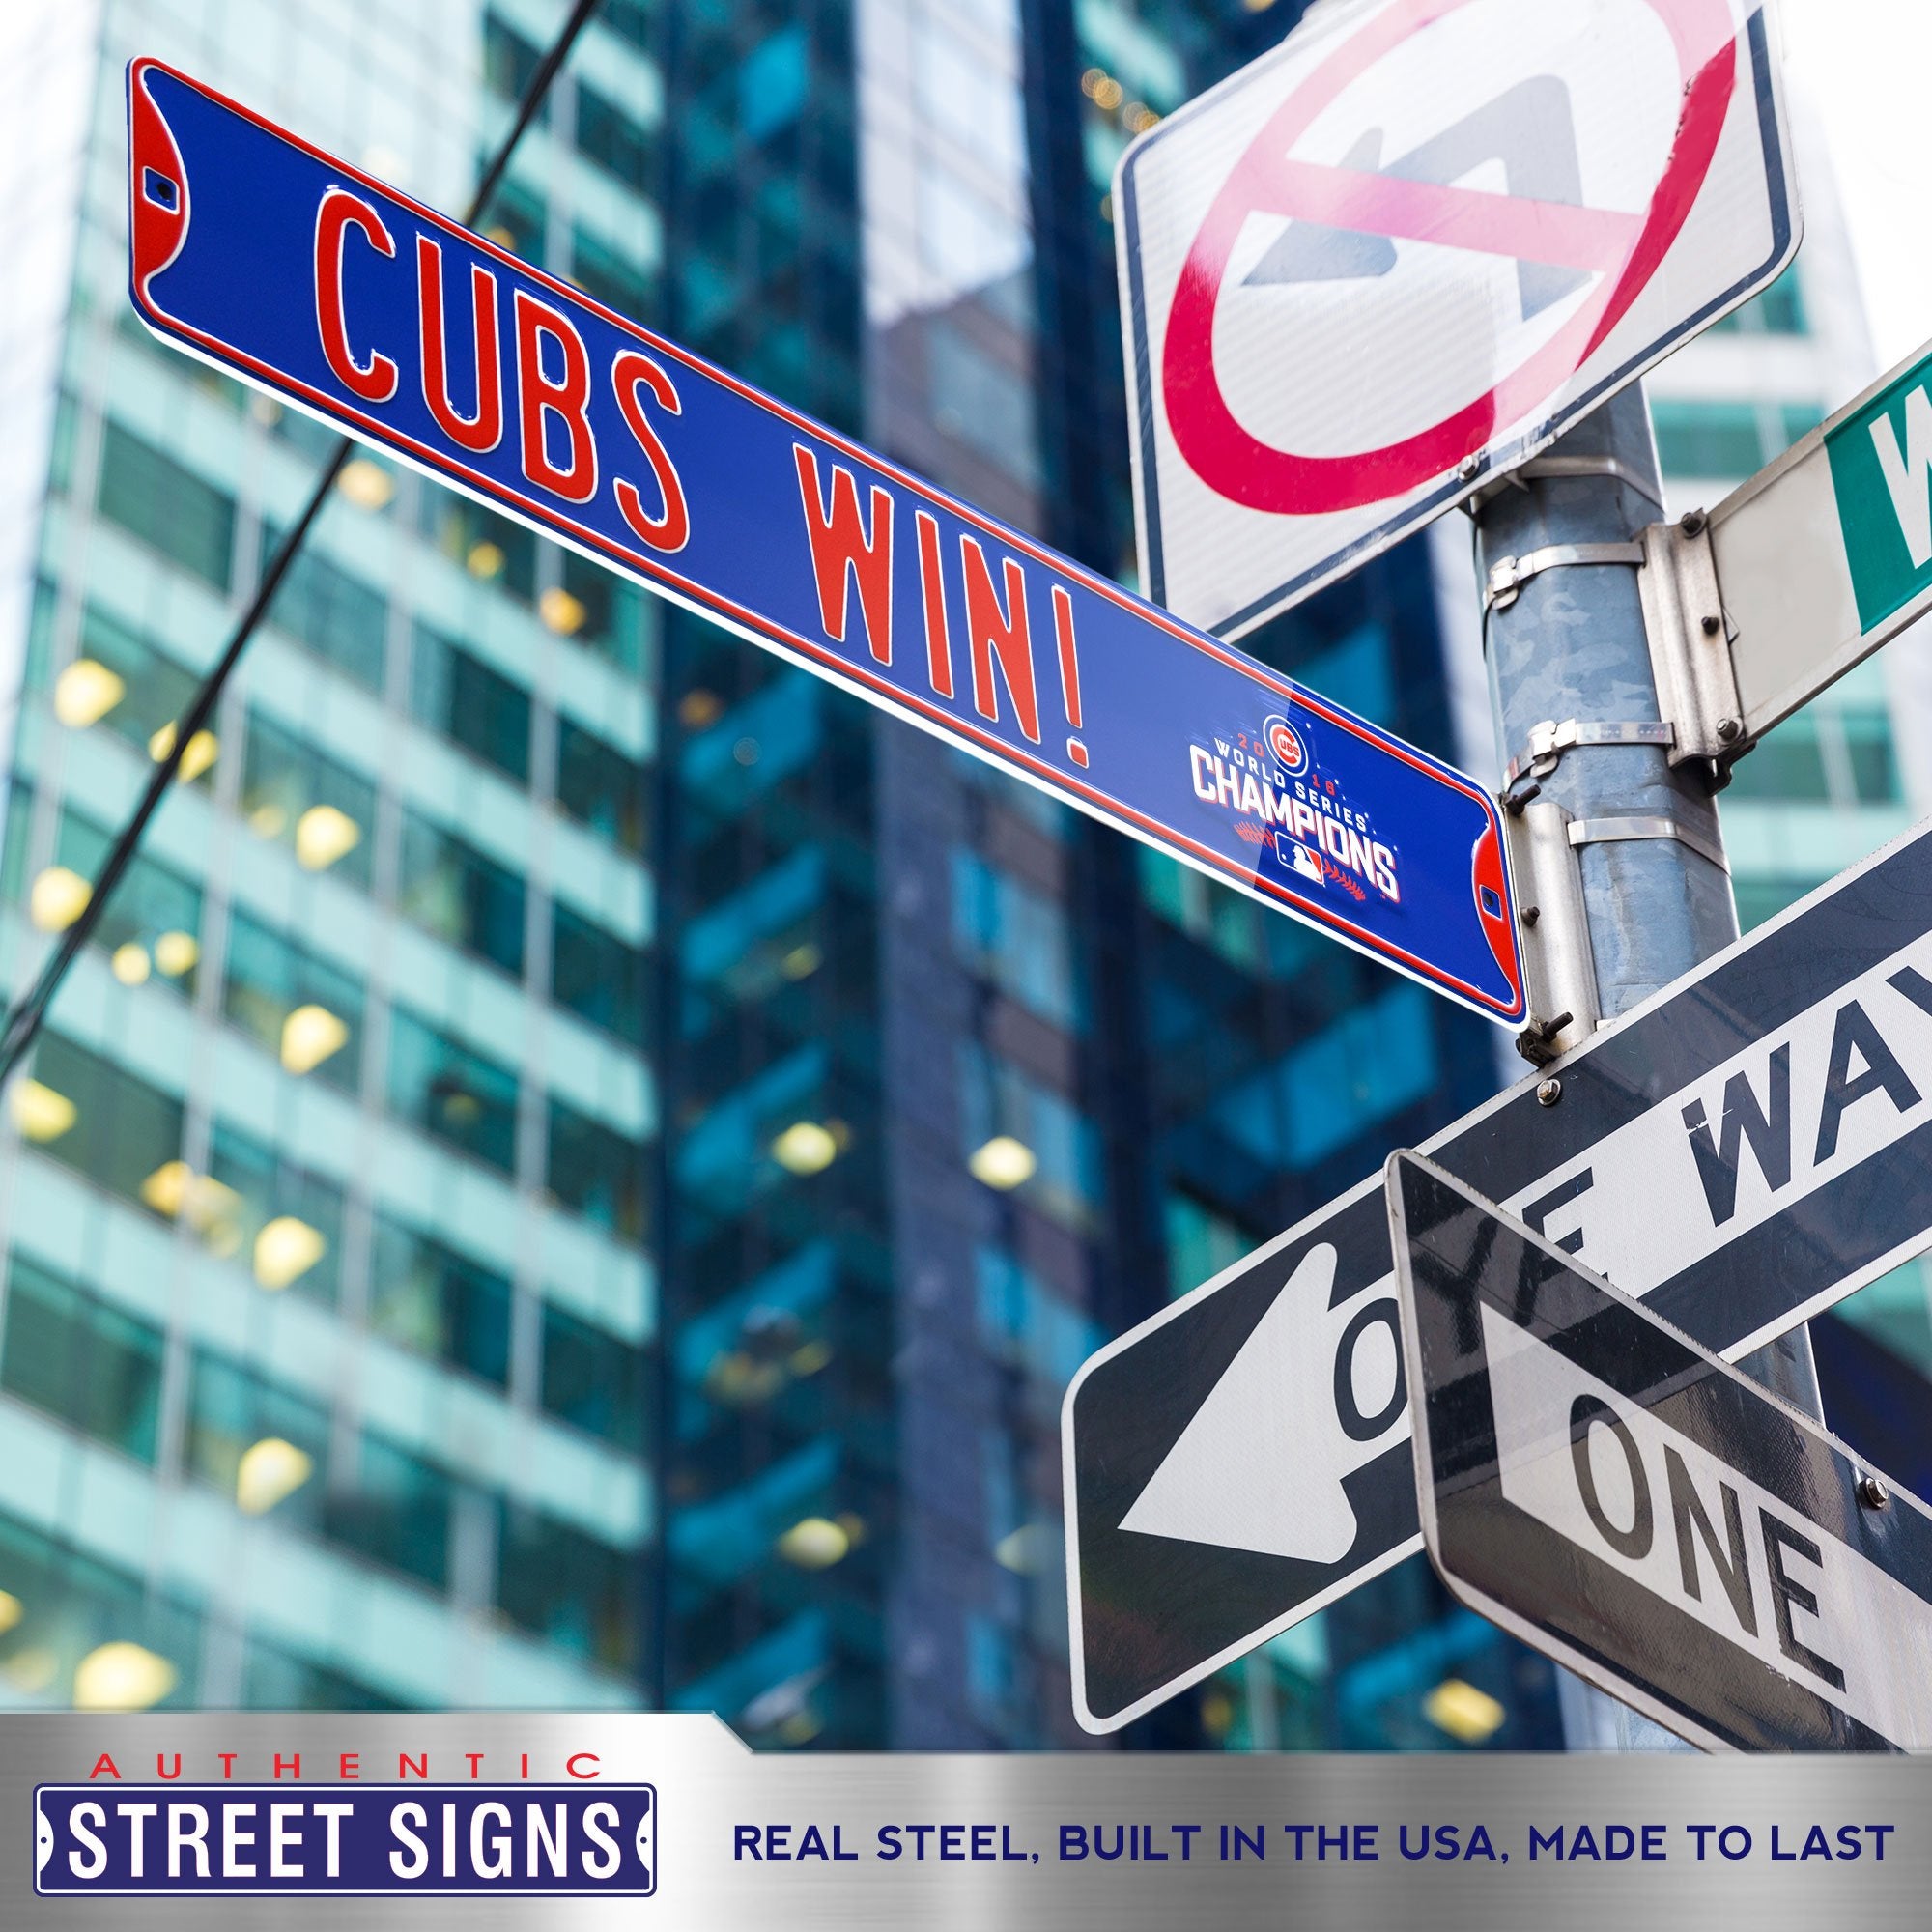 Chicago Cubs Steel Street Sign with Logo-CUBS WIN w/ WS 2016 Logo 36" W x 6" H by Fathead